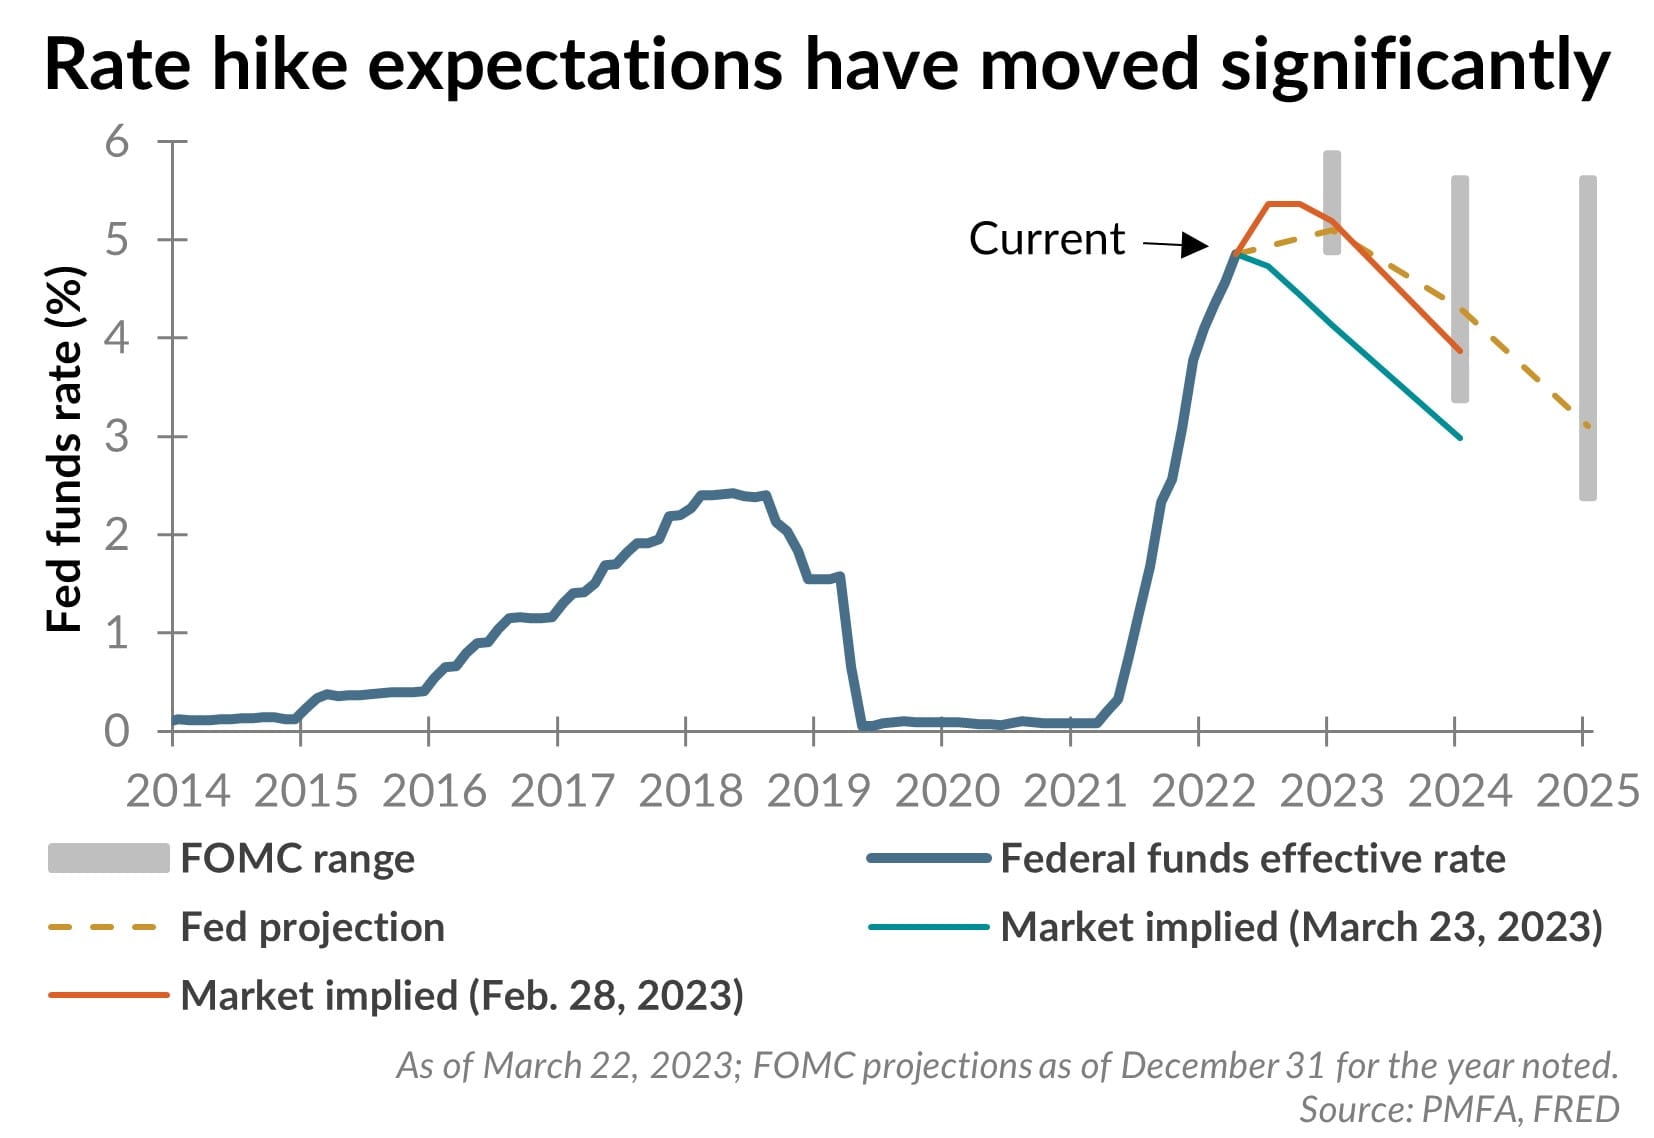 Rate hike expectations have moved significantly chart illustration